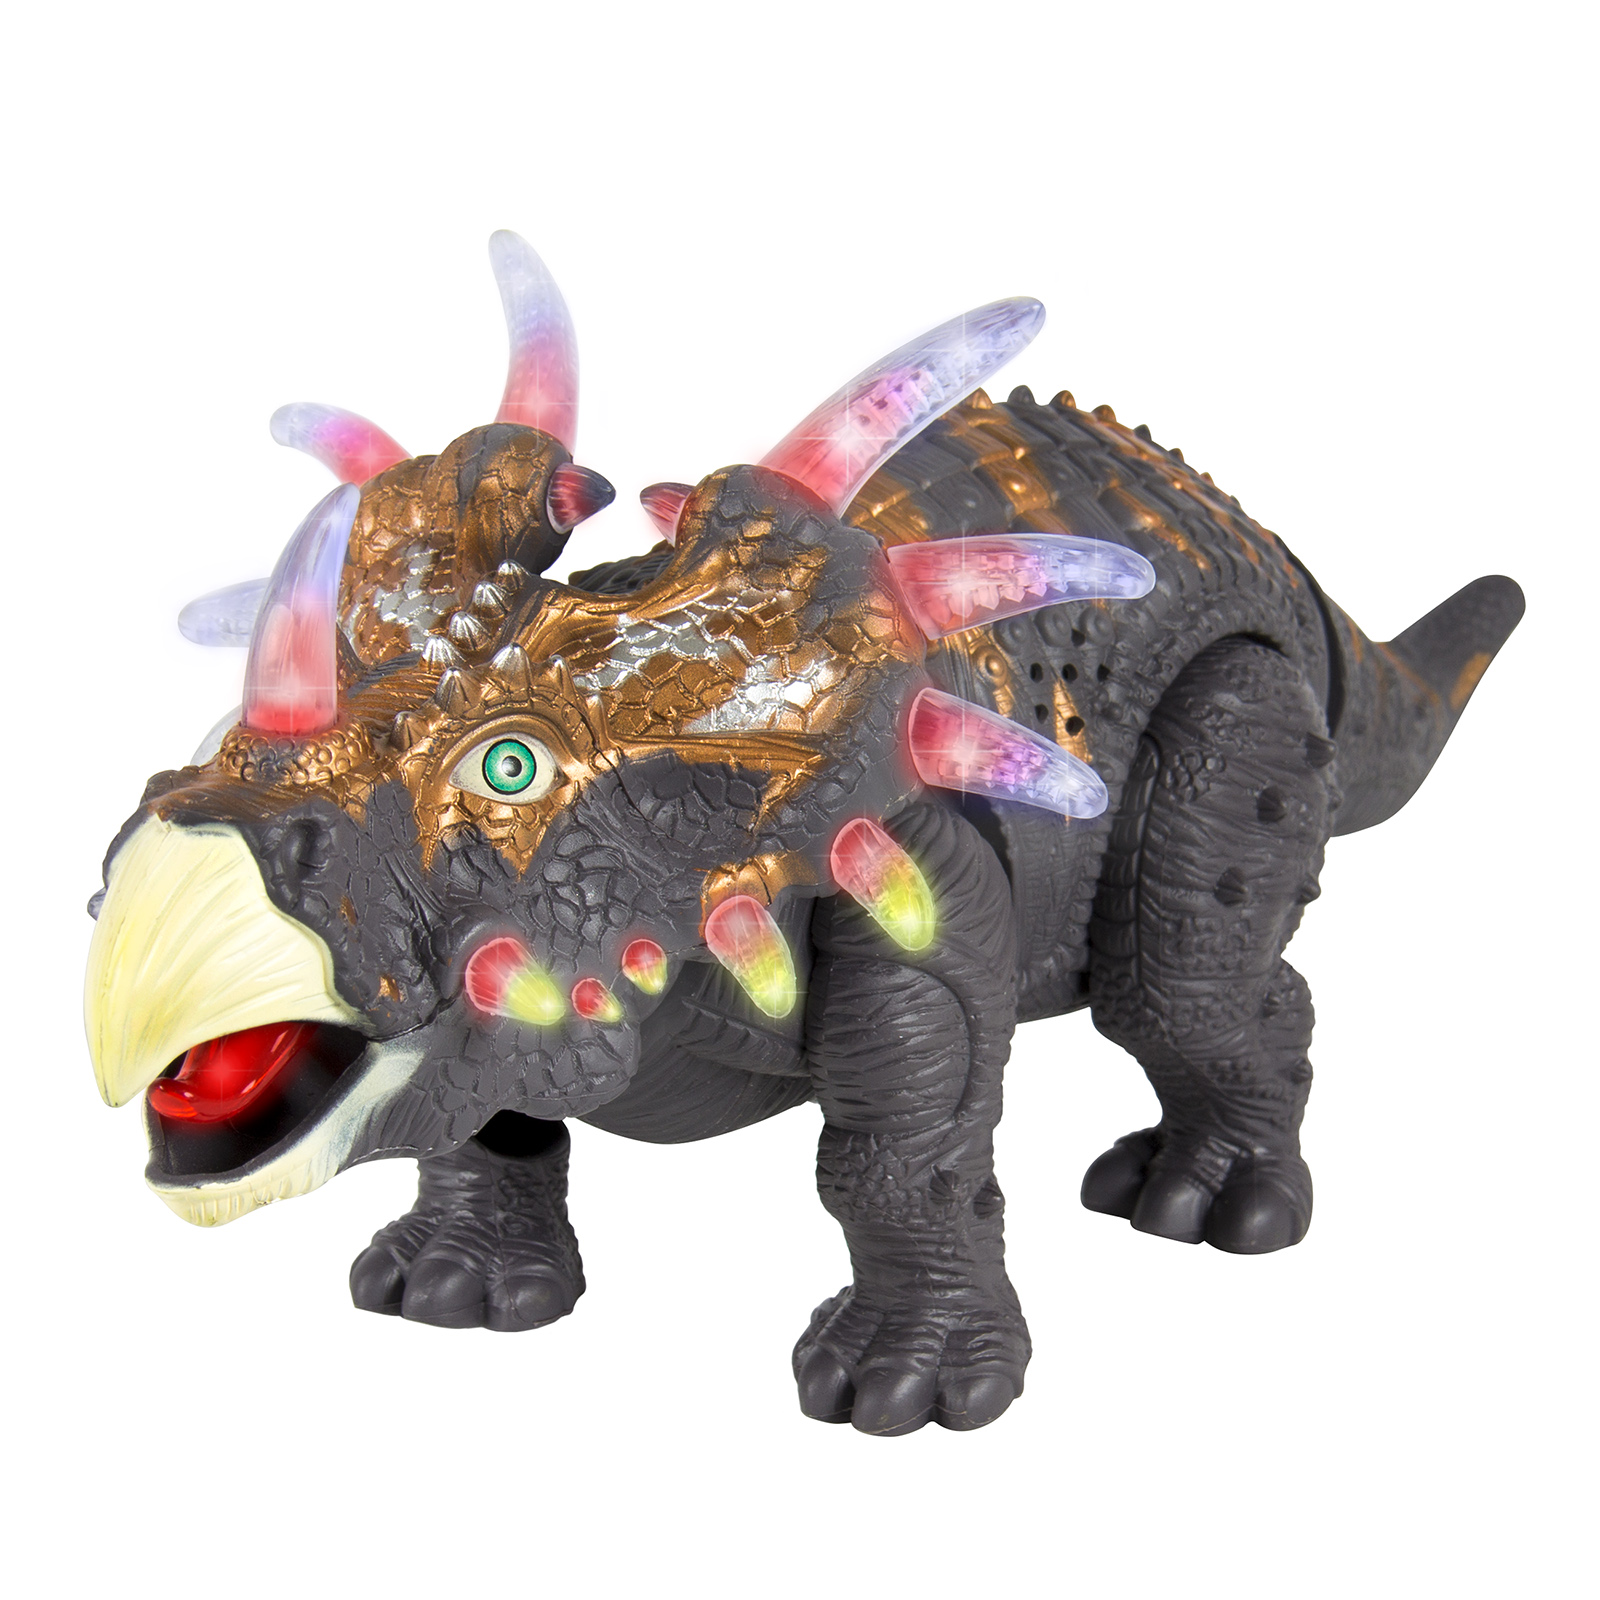 Best Choice Products 14in Kids RC Interactive Walking Triceratops Dinosaur Animal Toy Figure w/ Lights, Sound - image 1 of 7